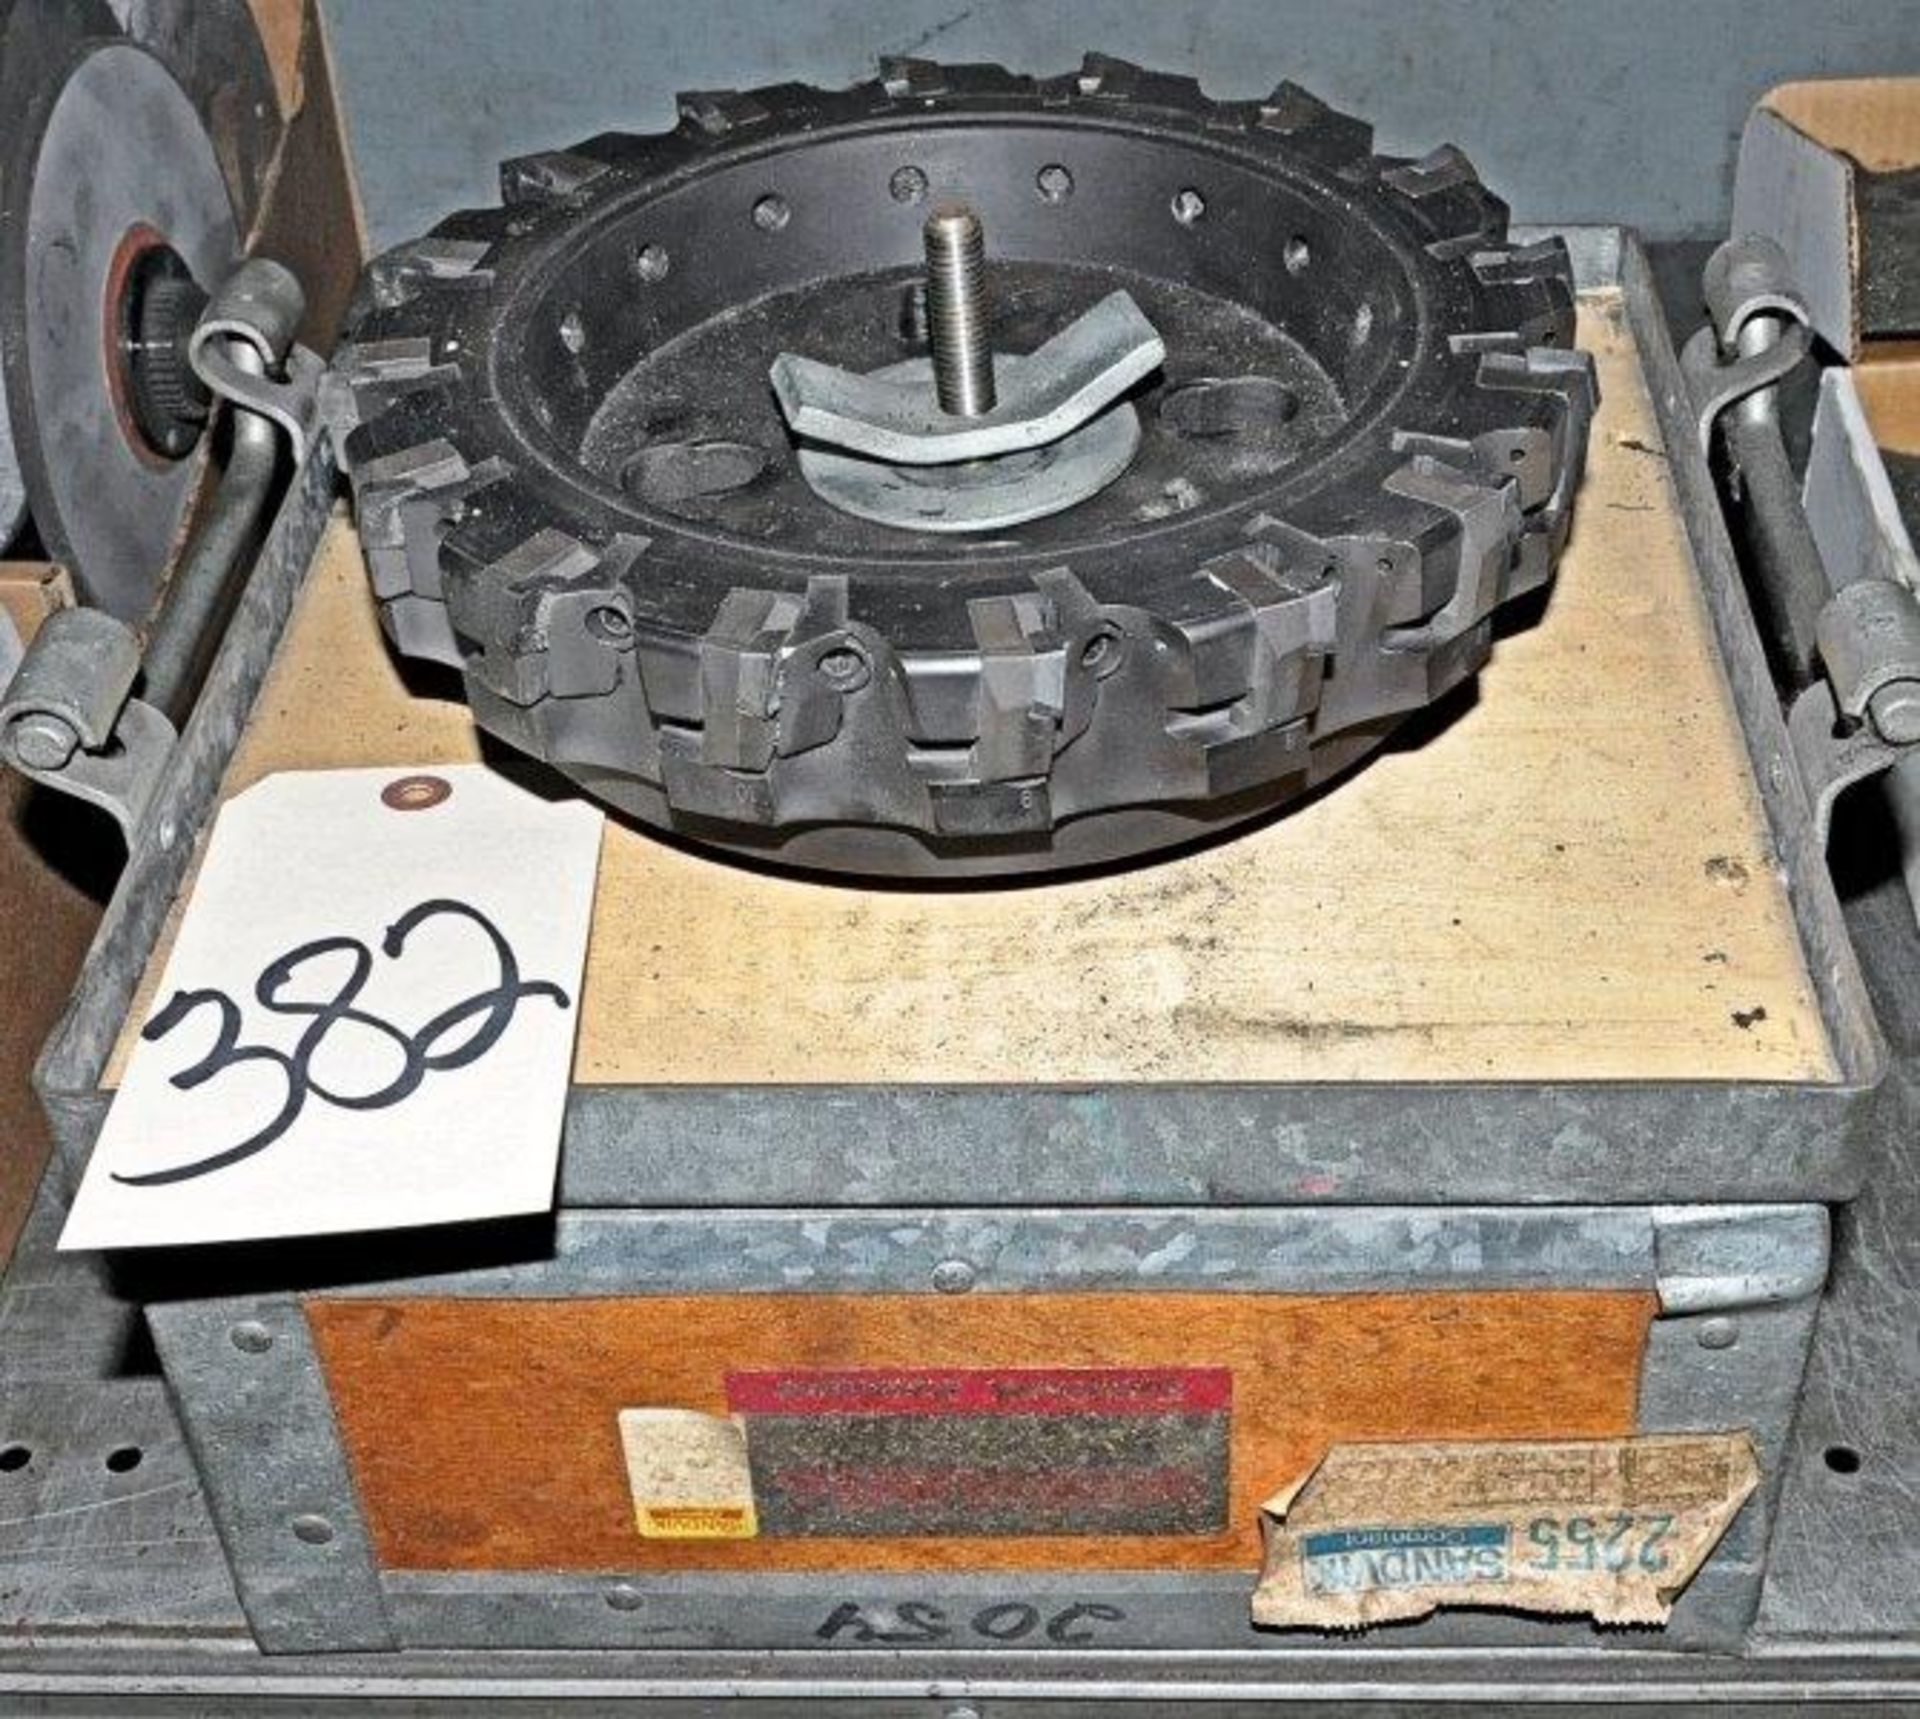 Sandvik Modulmill Cutter Body with Case, (Tool Room) - Image 2 of 2